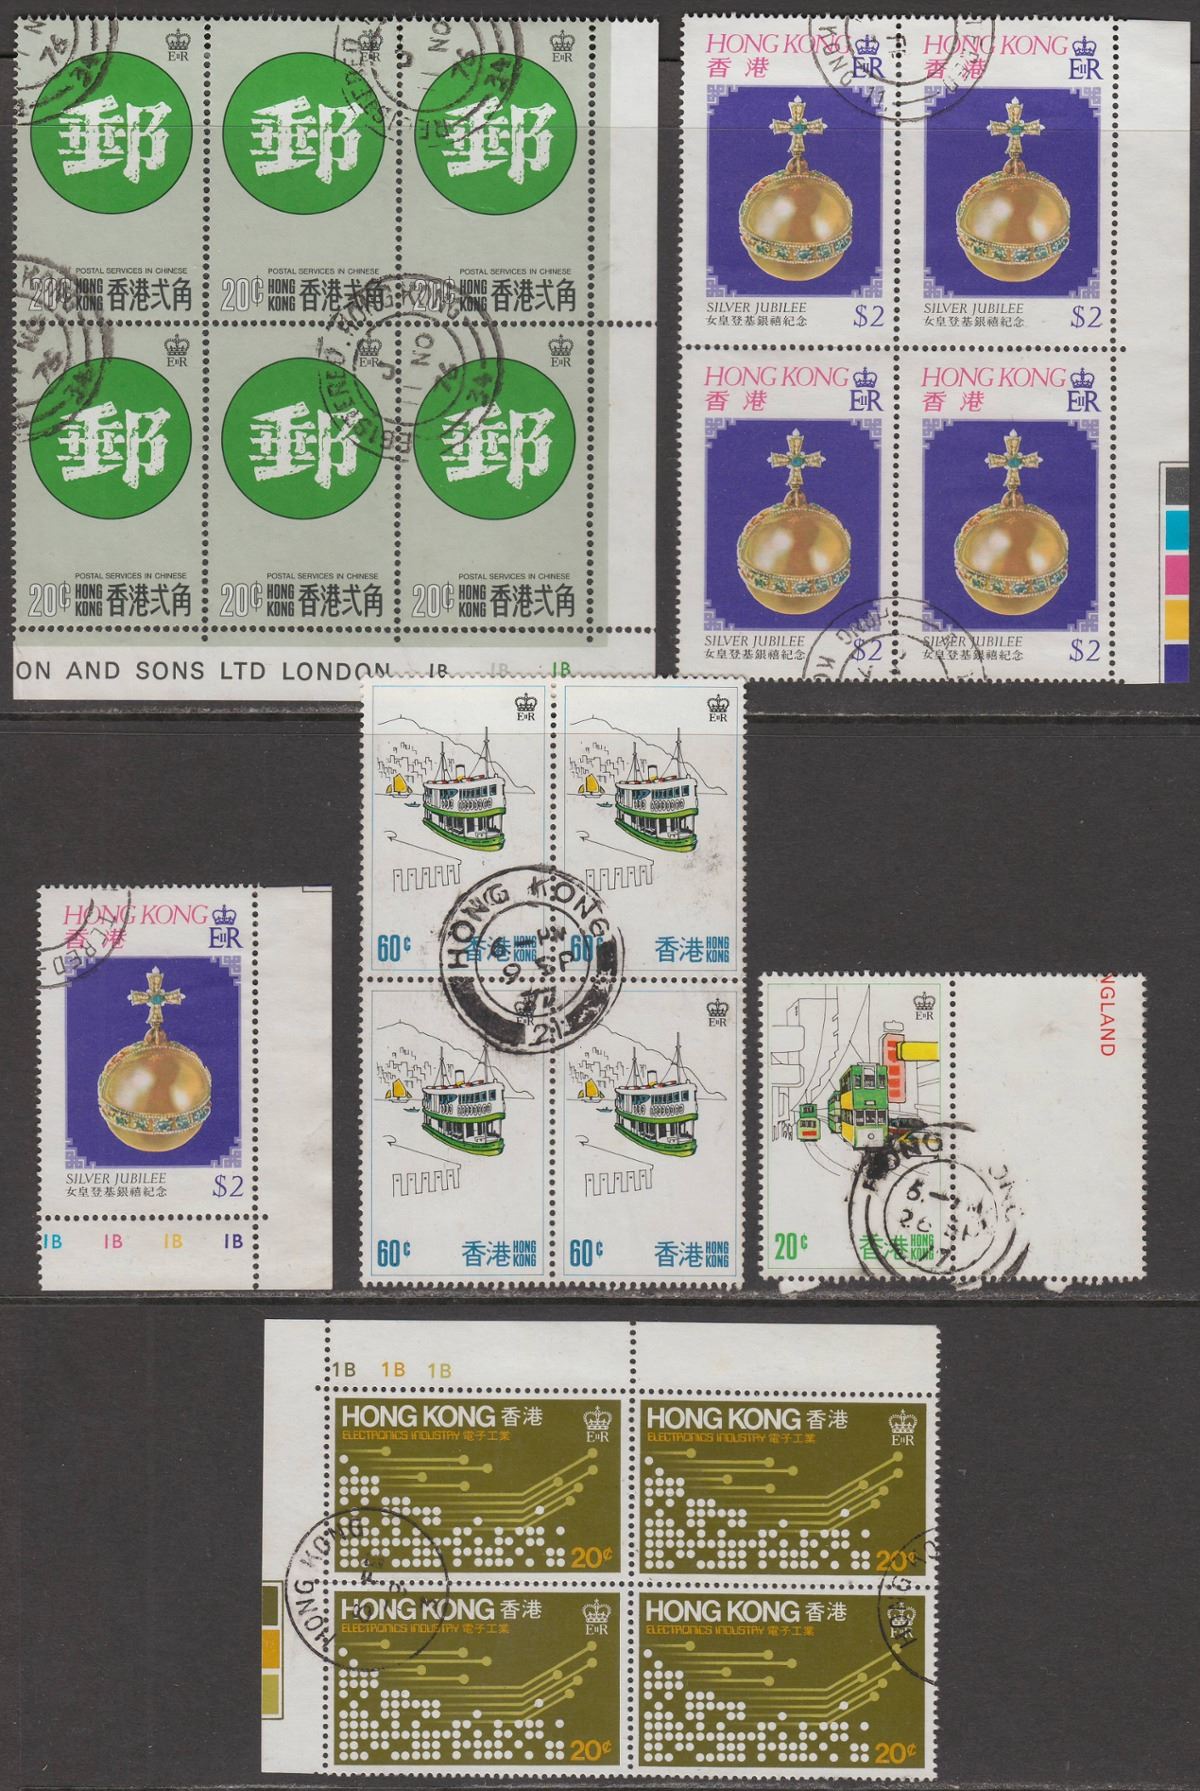 Hong Kong 1976-79 QEII Selection Mostly Blocks Used including Plate Numbers